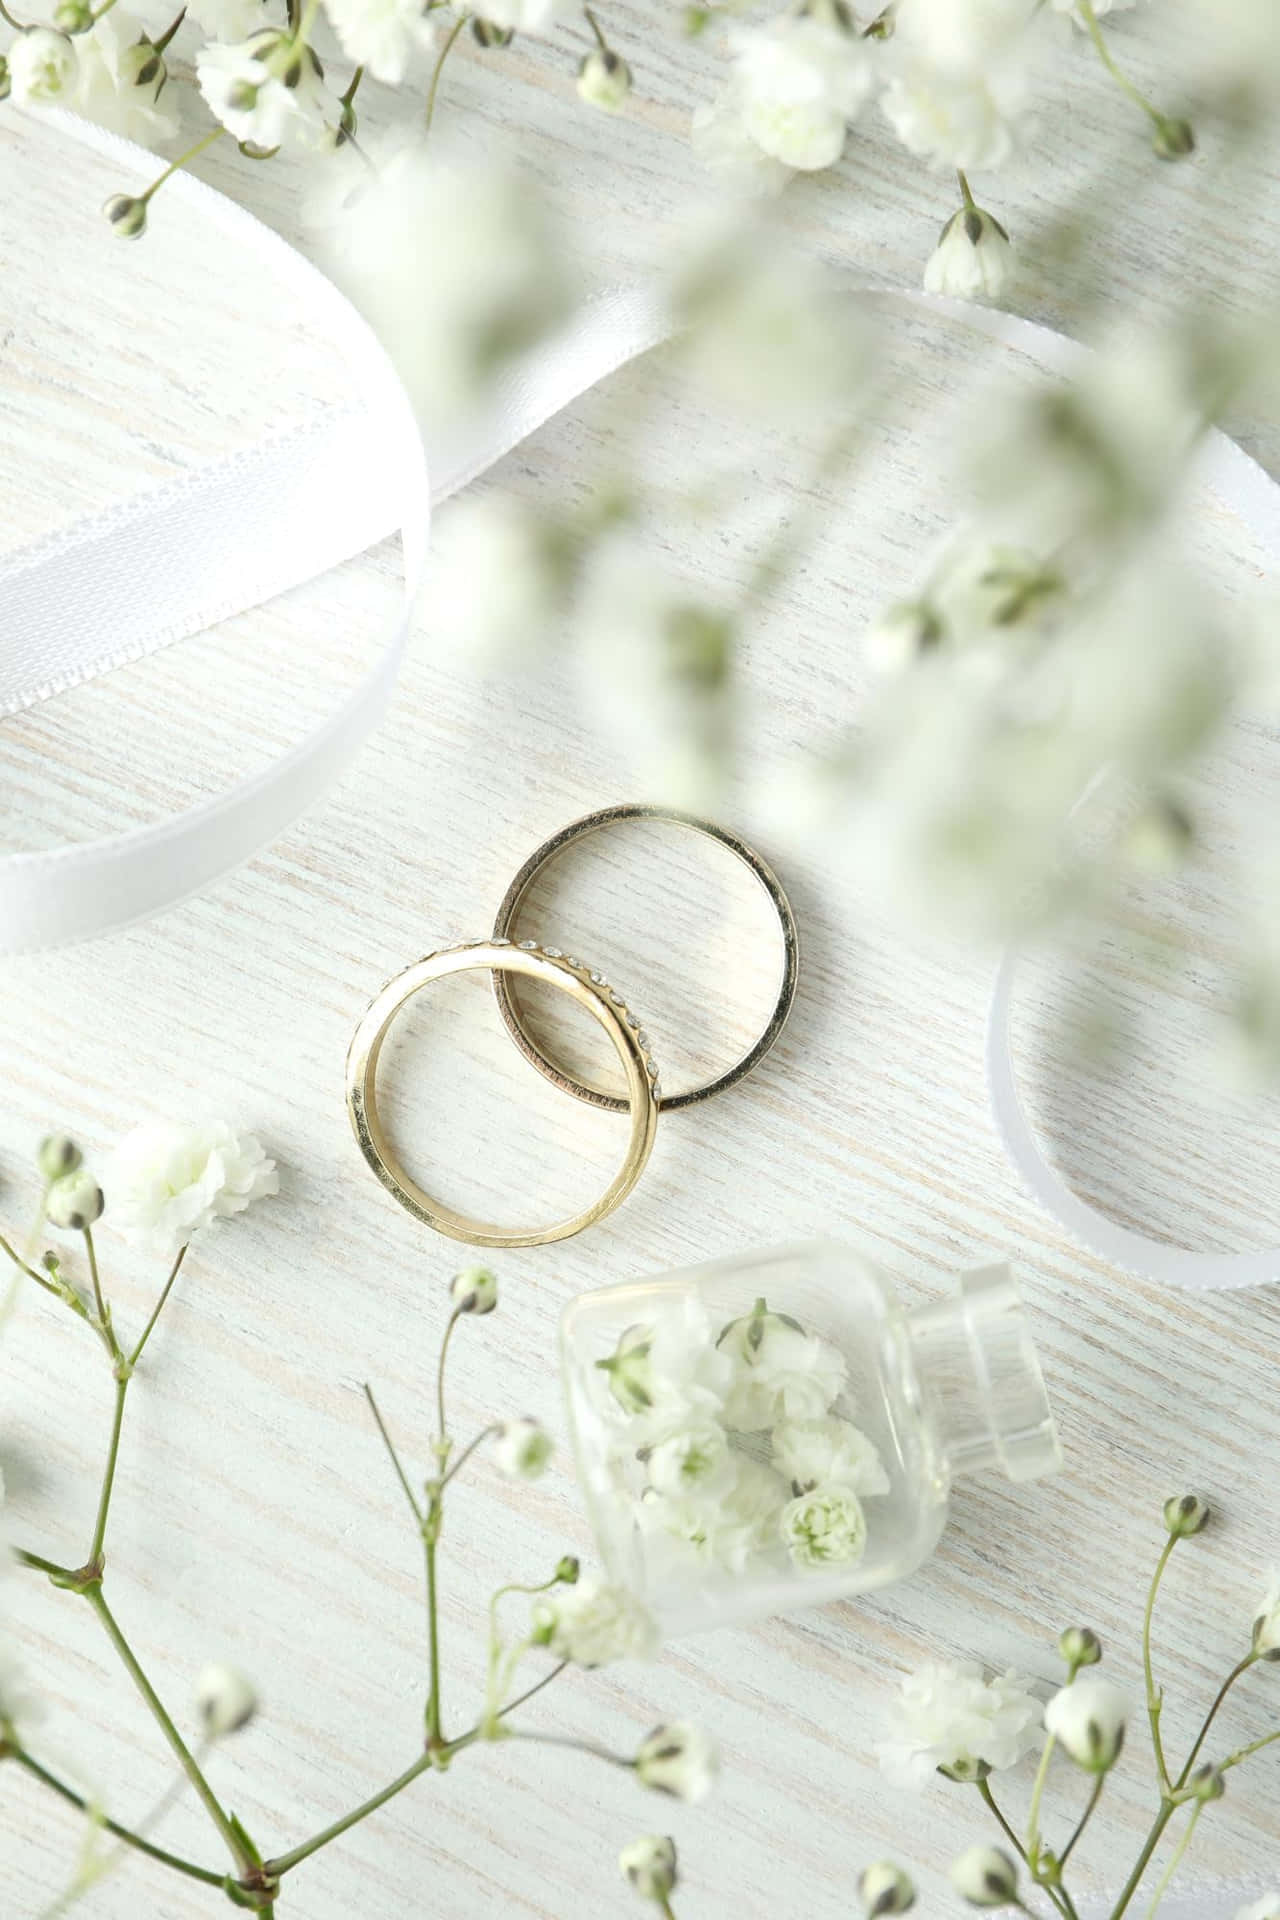 Beautifully crafted wedding rings for the special day